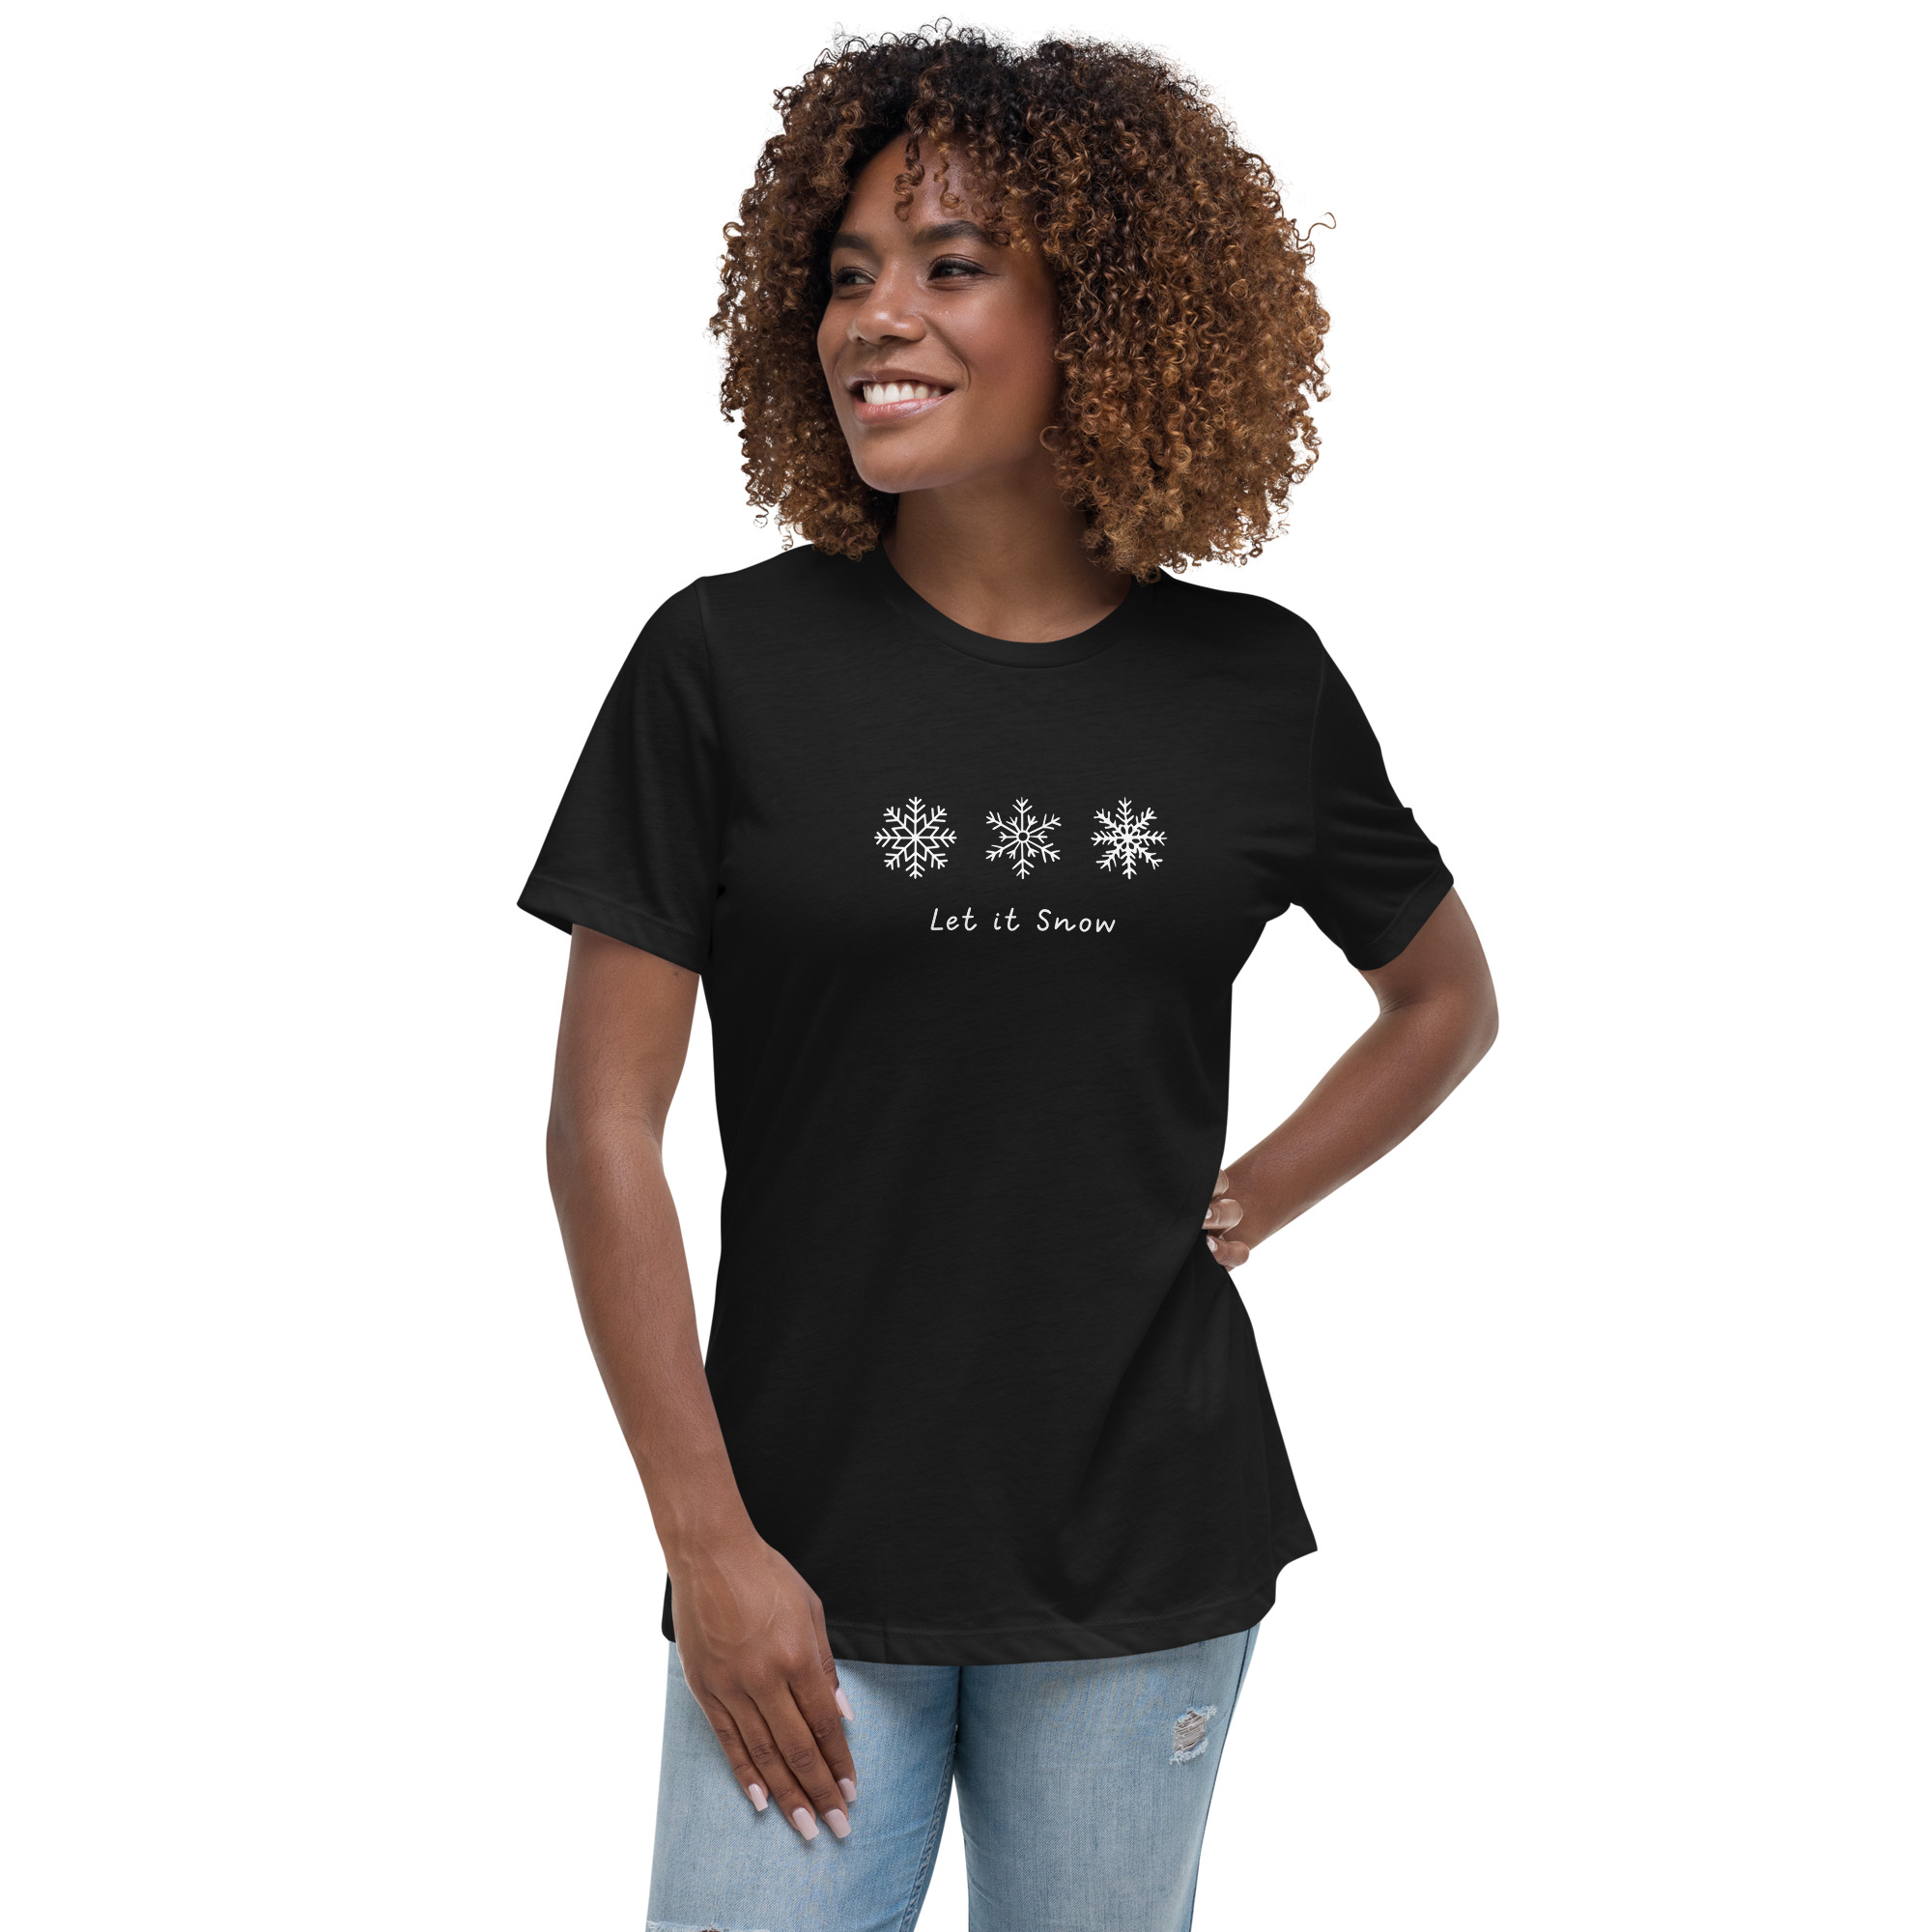 Get ready to spread holiday cheer with every step you take, and let it snow in style with this delightful women's t-shirt. Our "Let it Snow" Women's Christmas T-Shirt is the perfect blend of comfort, style, and holiday spirit that will make your winter wardrobe complete.